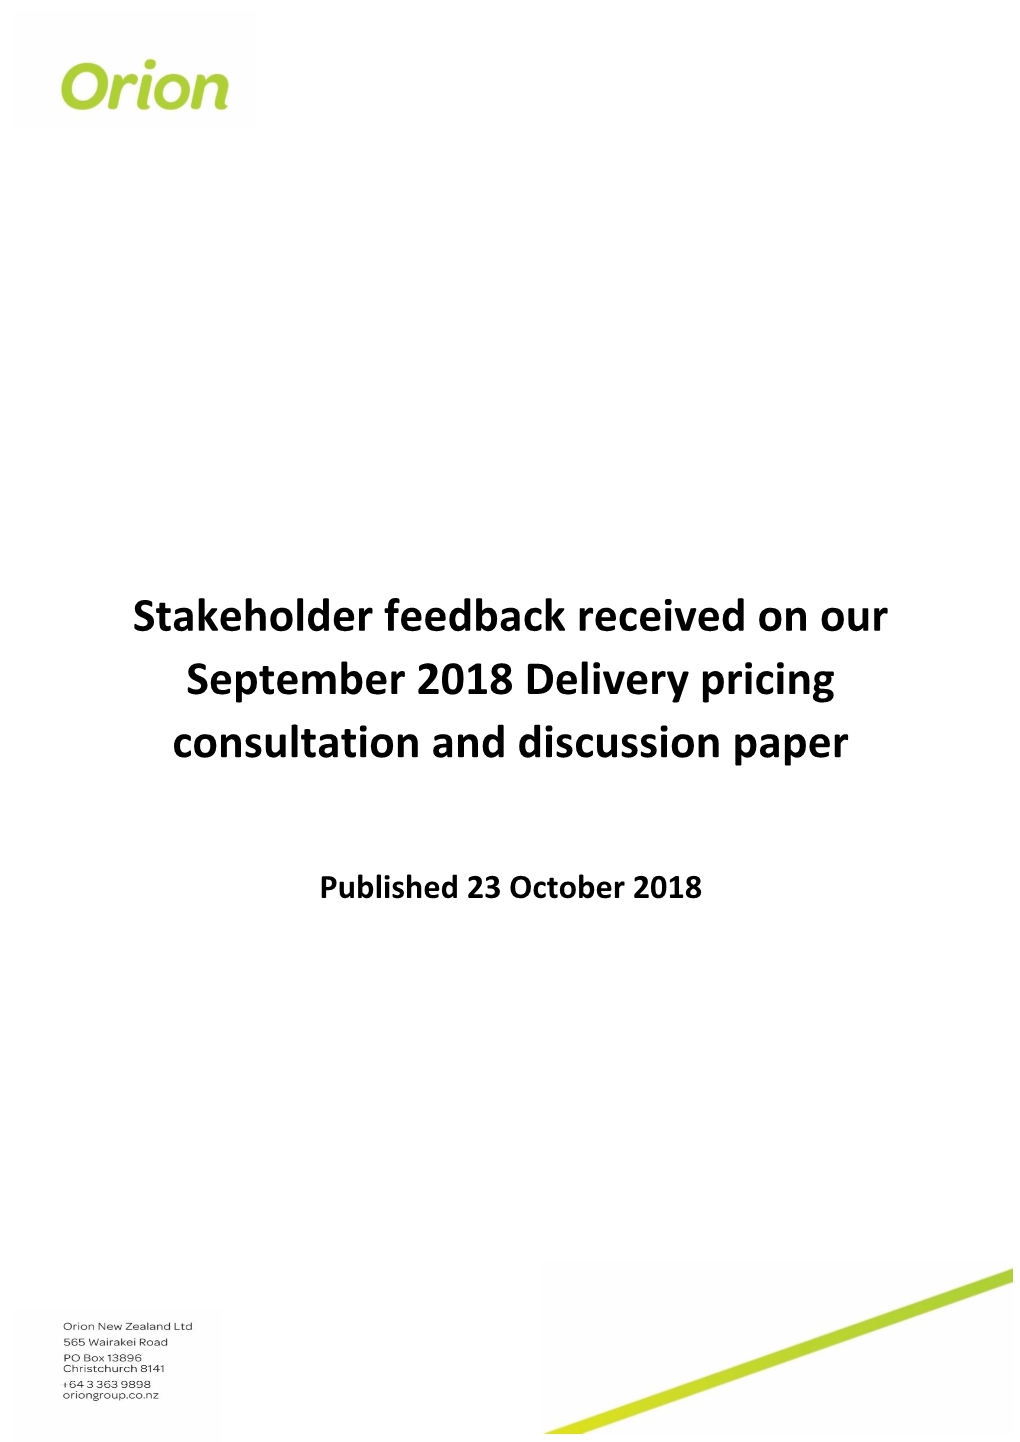 Stakeholder Feedback Received on Our September 2018 Delivery Pricing Consultation and Discussion Paper